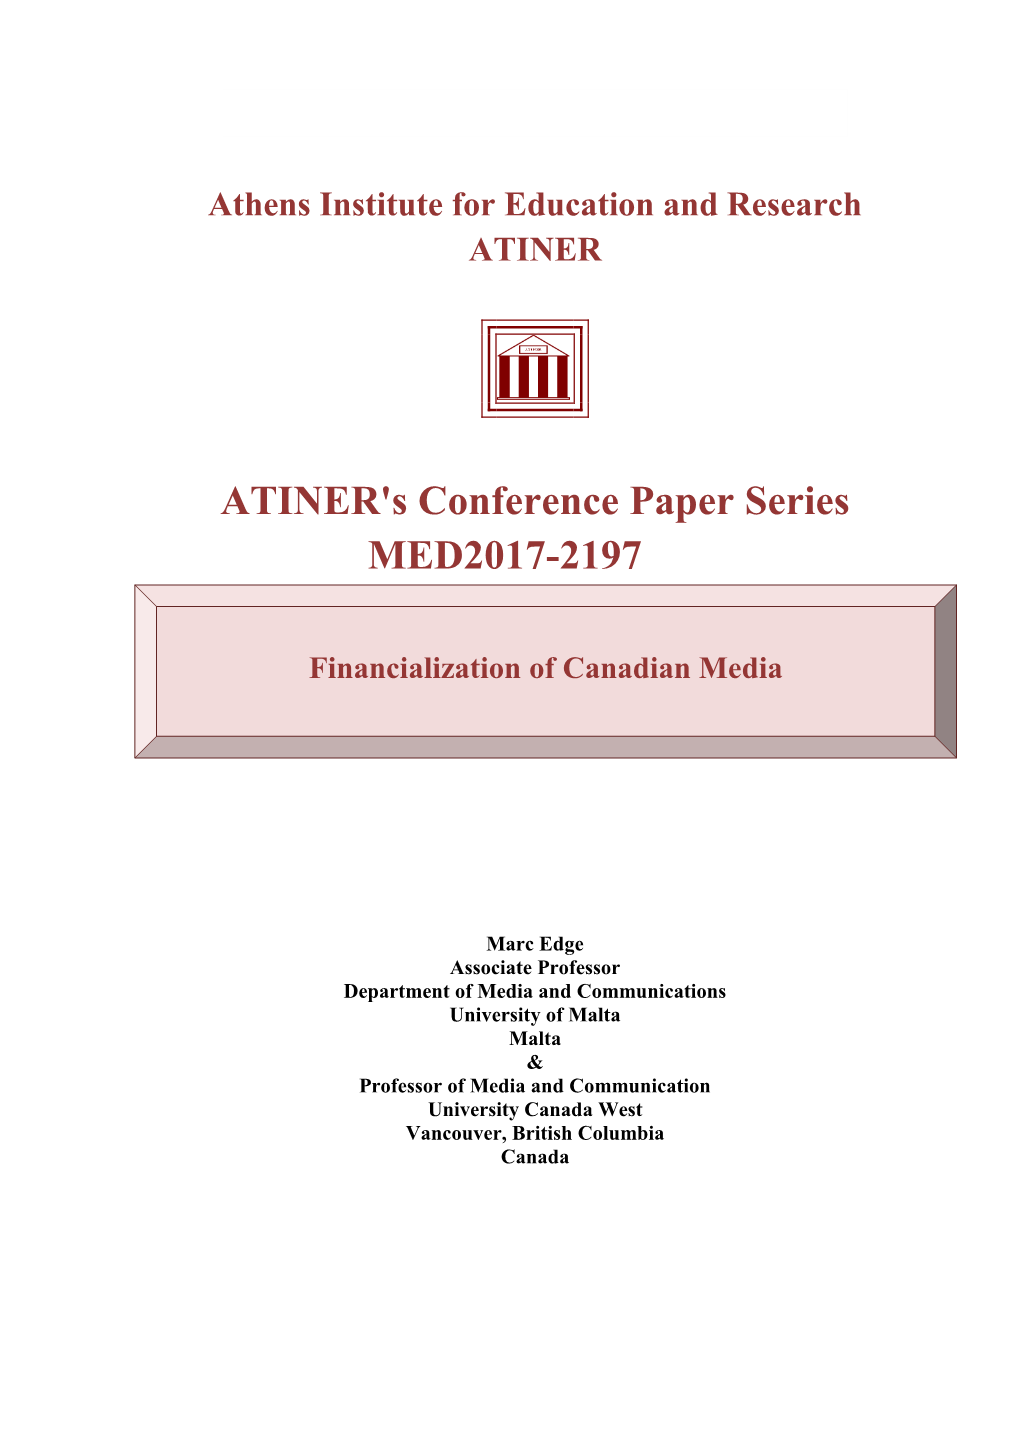 ATINER's Conference Paper Series MED2017-2197